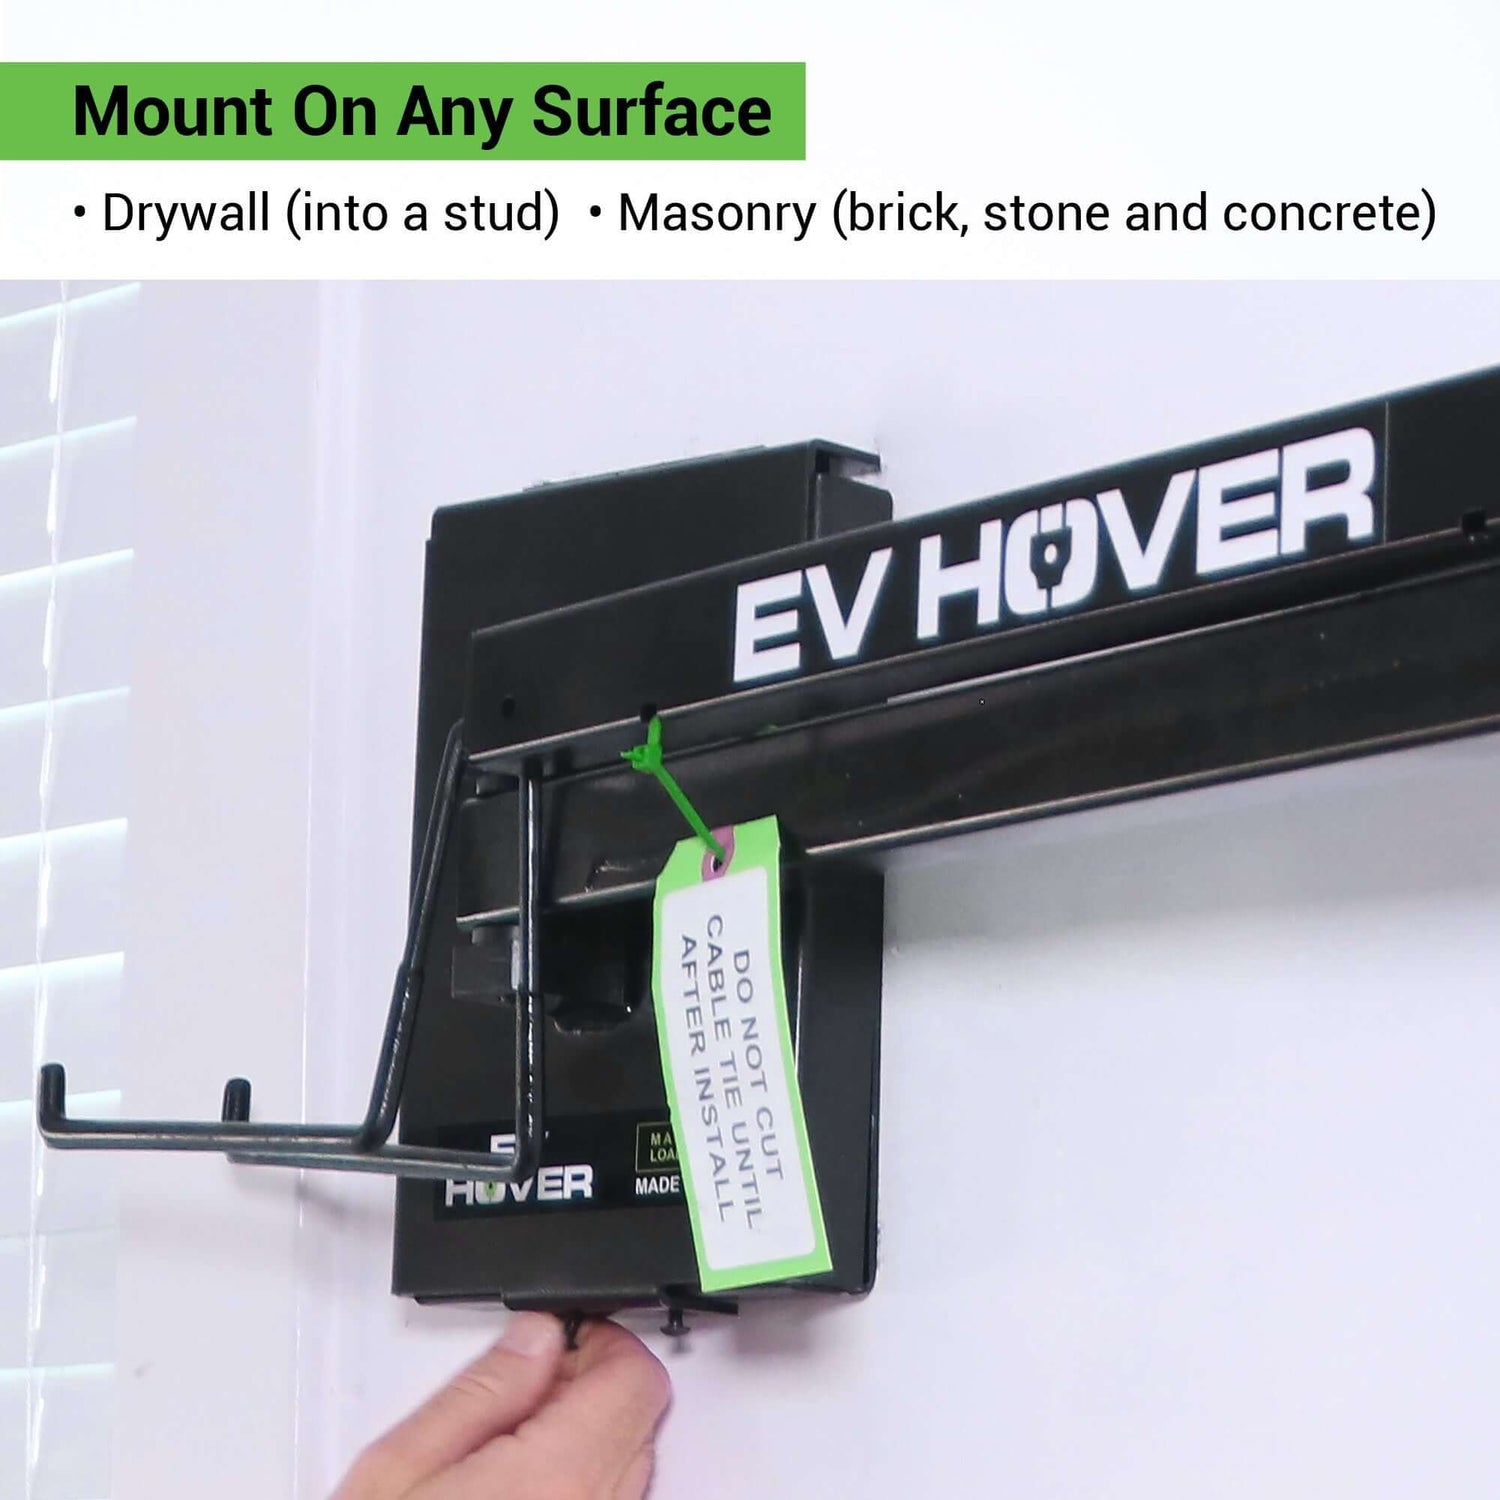 EV Hover - Mount On Any Surface: Drywall (into a stud) or Masonry (brick, stone and concrete)